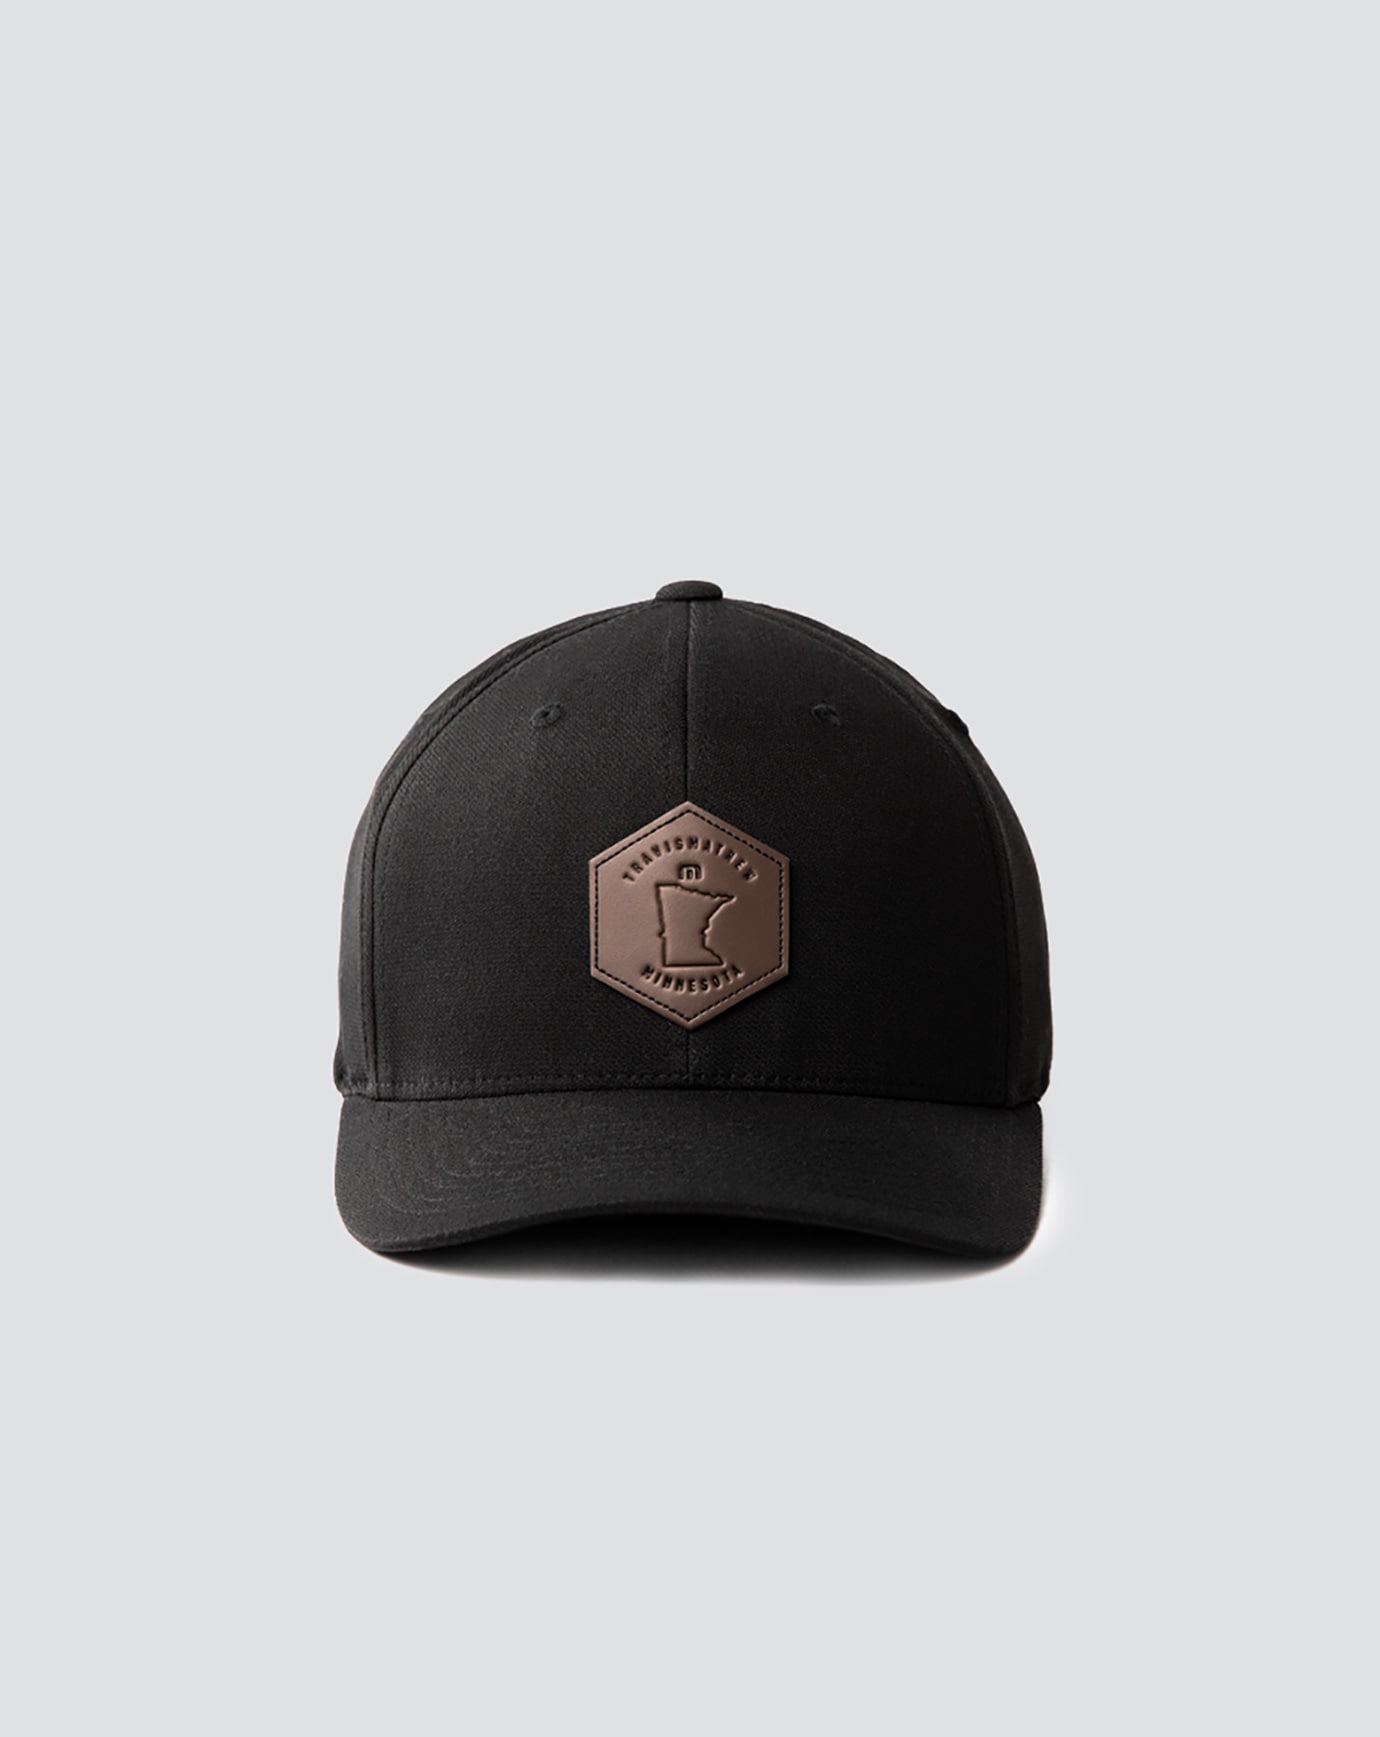 Related Product - CABIN LIFE SNAPBACK HAT